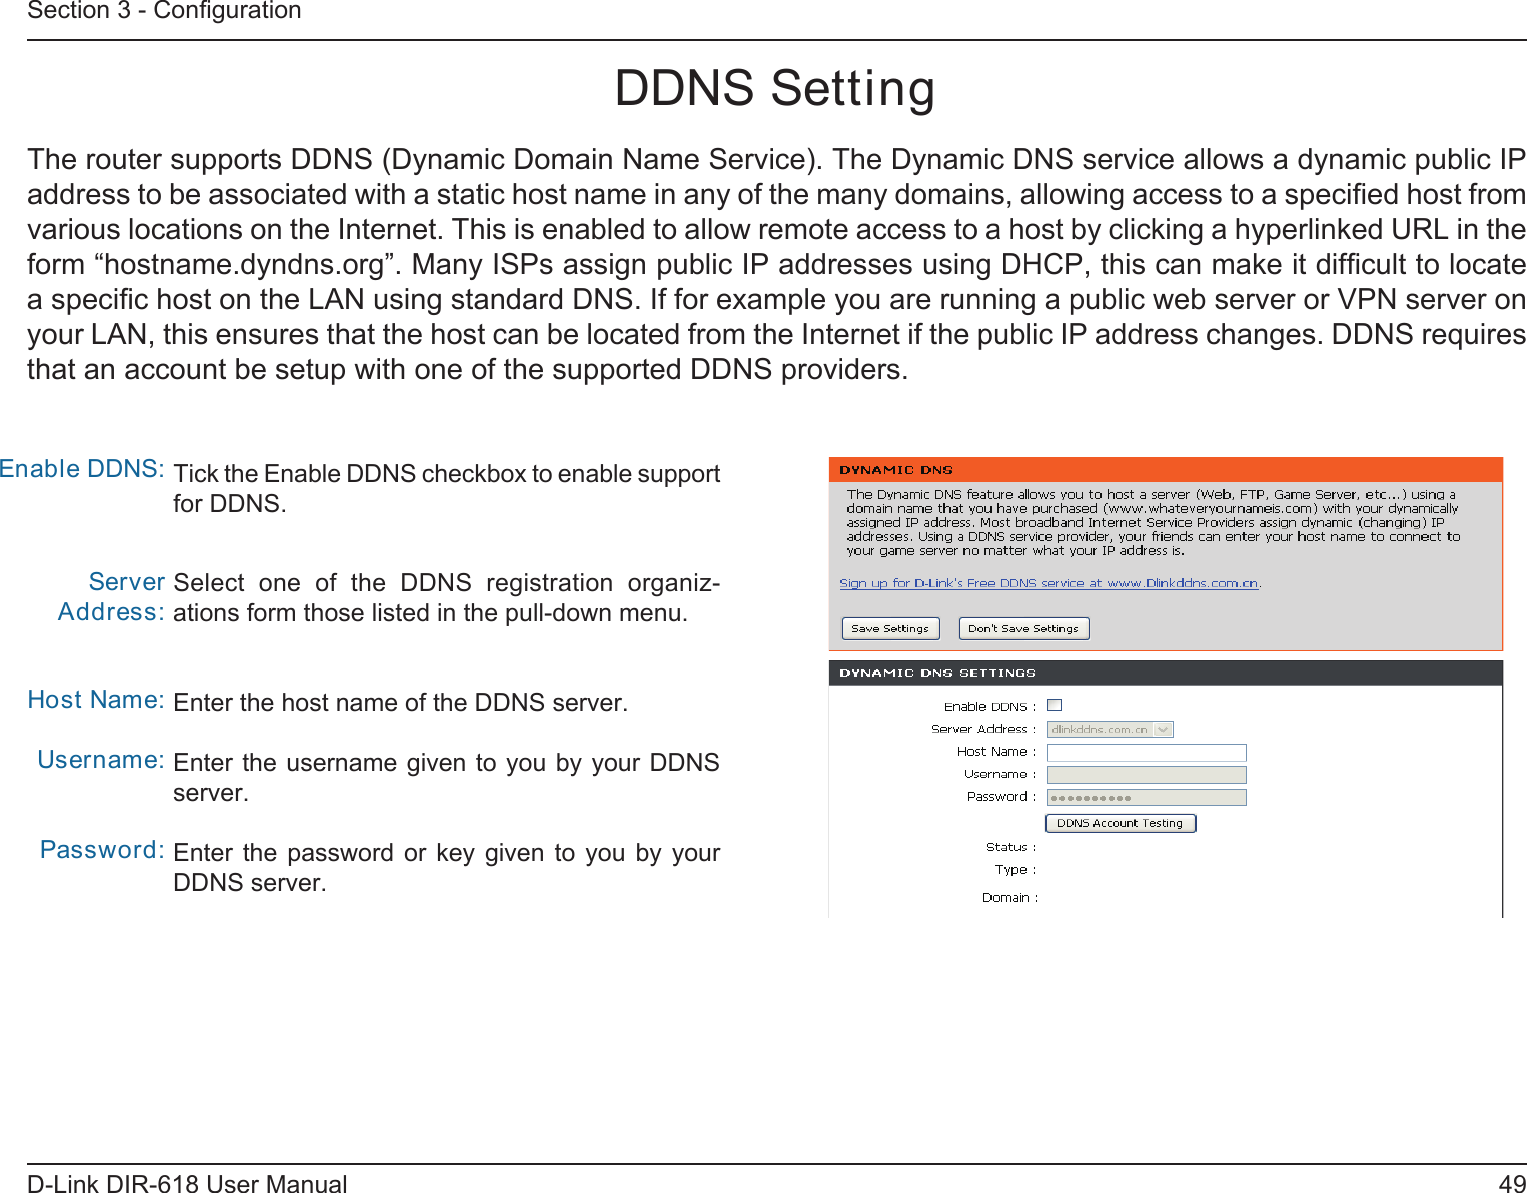 49D-Link DIR-618 User ManualSection 3 - ConﬁgurationDDNS SettingTick the Enable DDNS checkbox to enable support for DDNS.Select  one  of  the  DDNS  registration  organiz-ations form those listed in the pull-down menu. Enter the host name of the DDNS server.Enter the username given to you by your DDNSserver.Enter the  password  or  key  given  to  you  by  yourDDNS server.Enable DDNS:Server Address:Host Name:Username:Password:The router supports DDNS (Dynamic Domain Name Service). The Dynamic DNS service allows a dynamic public IPaddress to be associated with a static host name in any of the many domains, allowing access to a speciﬁed host from various locations on the Internet. This is enabled to allow remote access to a host by clicking a hyperlinked URL in theform “hostname.dyndns.org”. Many ISPs assign public IP addresses using DHCP, this can make it difﬁcult to locate a speciﬁc host on the LAN using standard DNS. If for example you are running a public web server or VPN server on your LAN, this ensures that the host can be located from the Internet if the public IP address changes. DDNS requires that an account be setup with one of the supported DDNS providers.